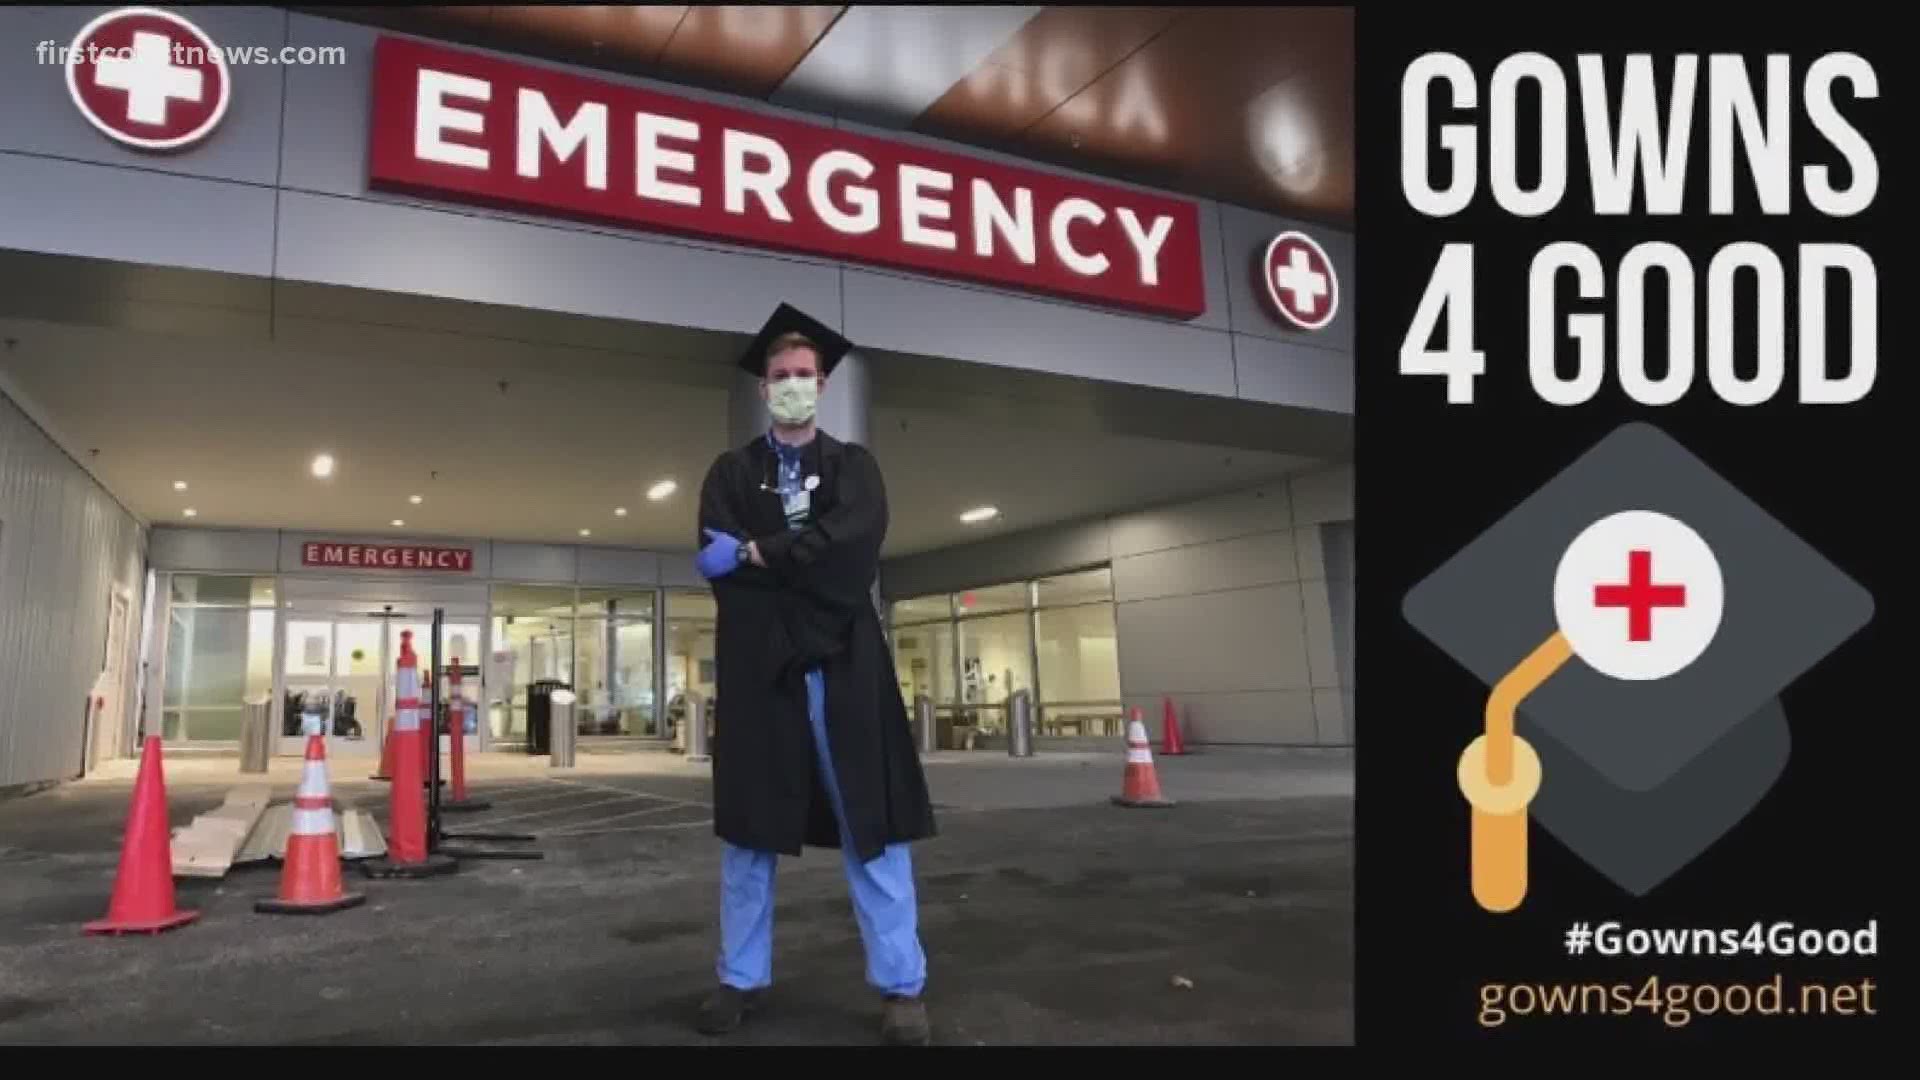 The gowns help guard healthcare workers against potential threats such as COVID-19.